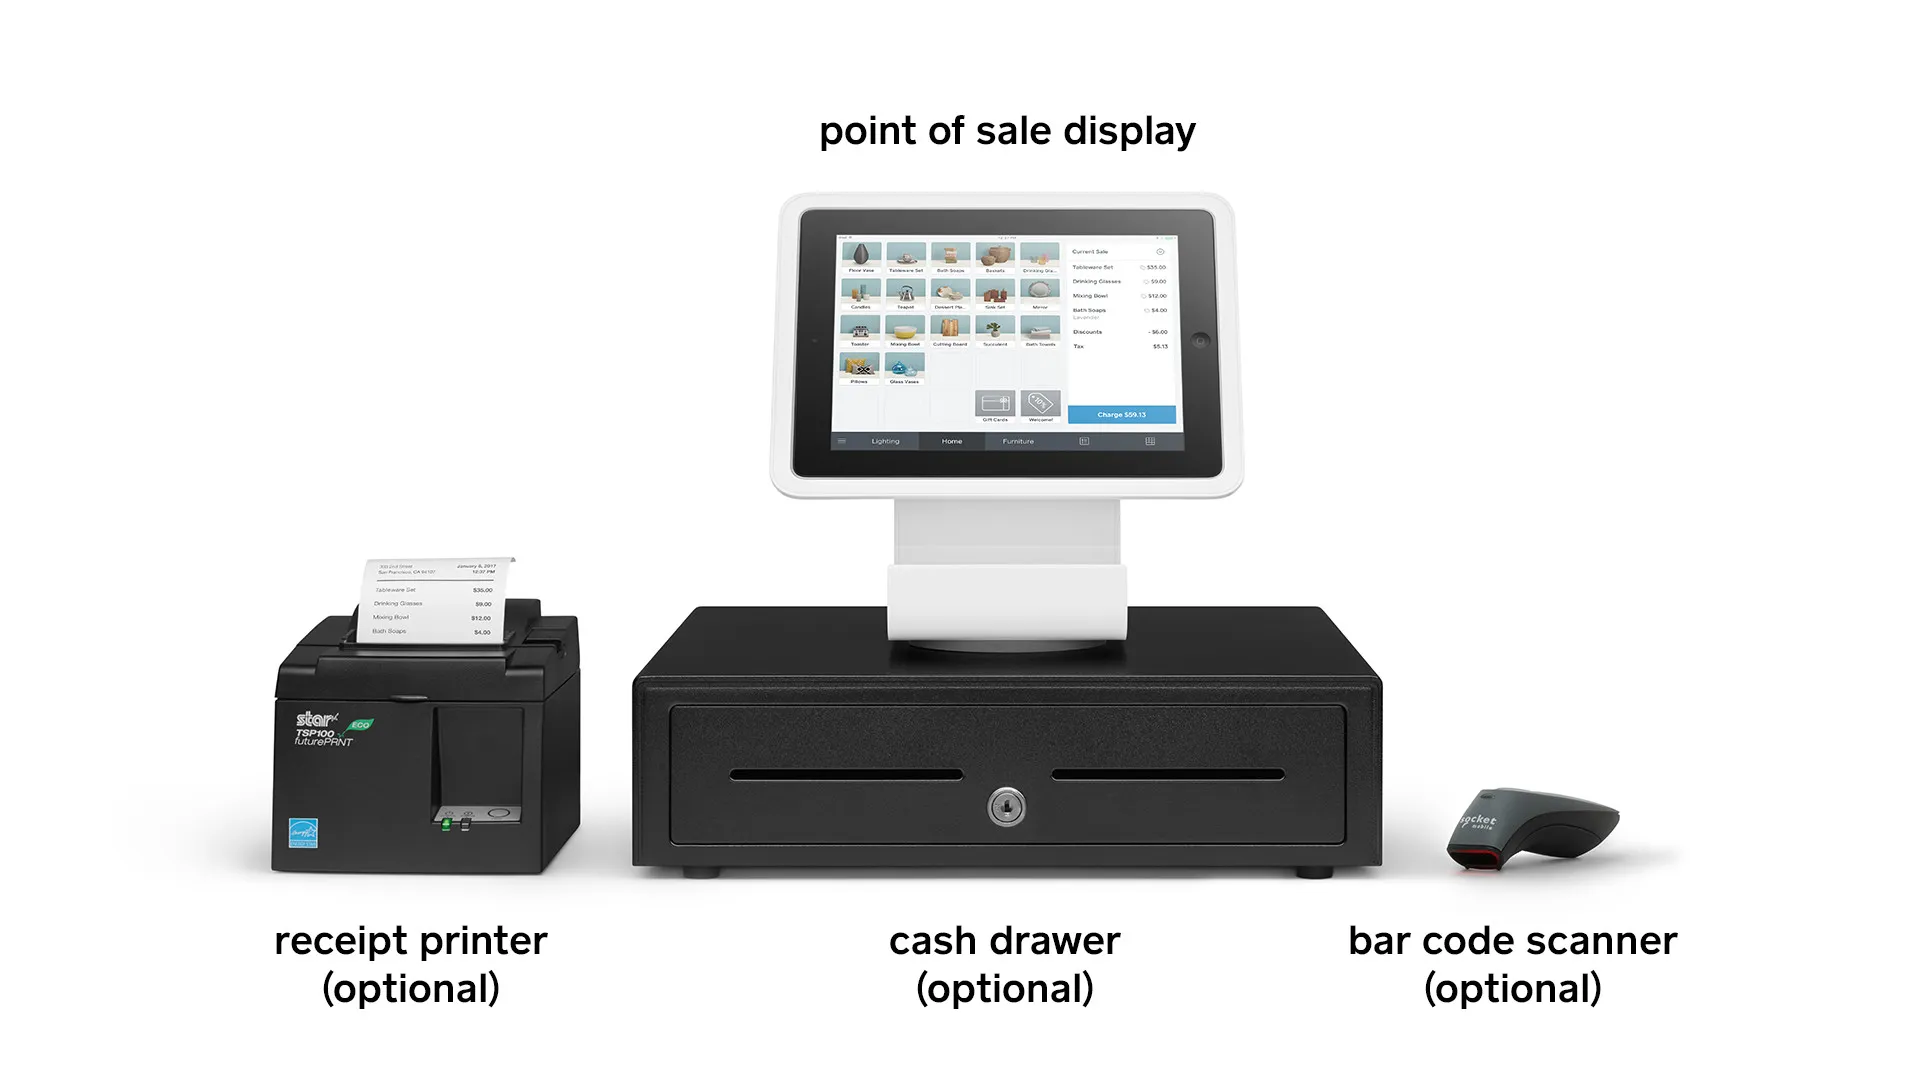 Different pieces of POS hardware that can affect costs